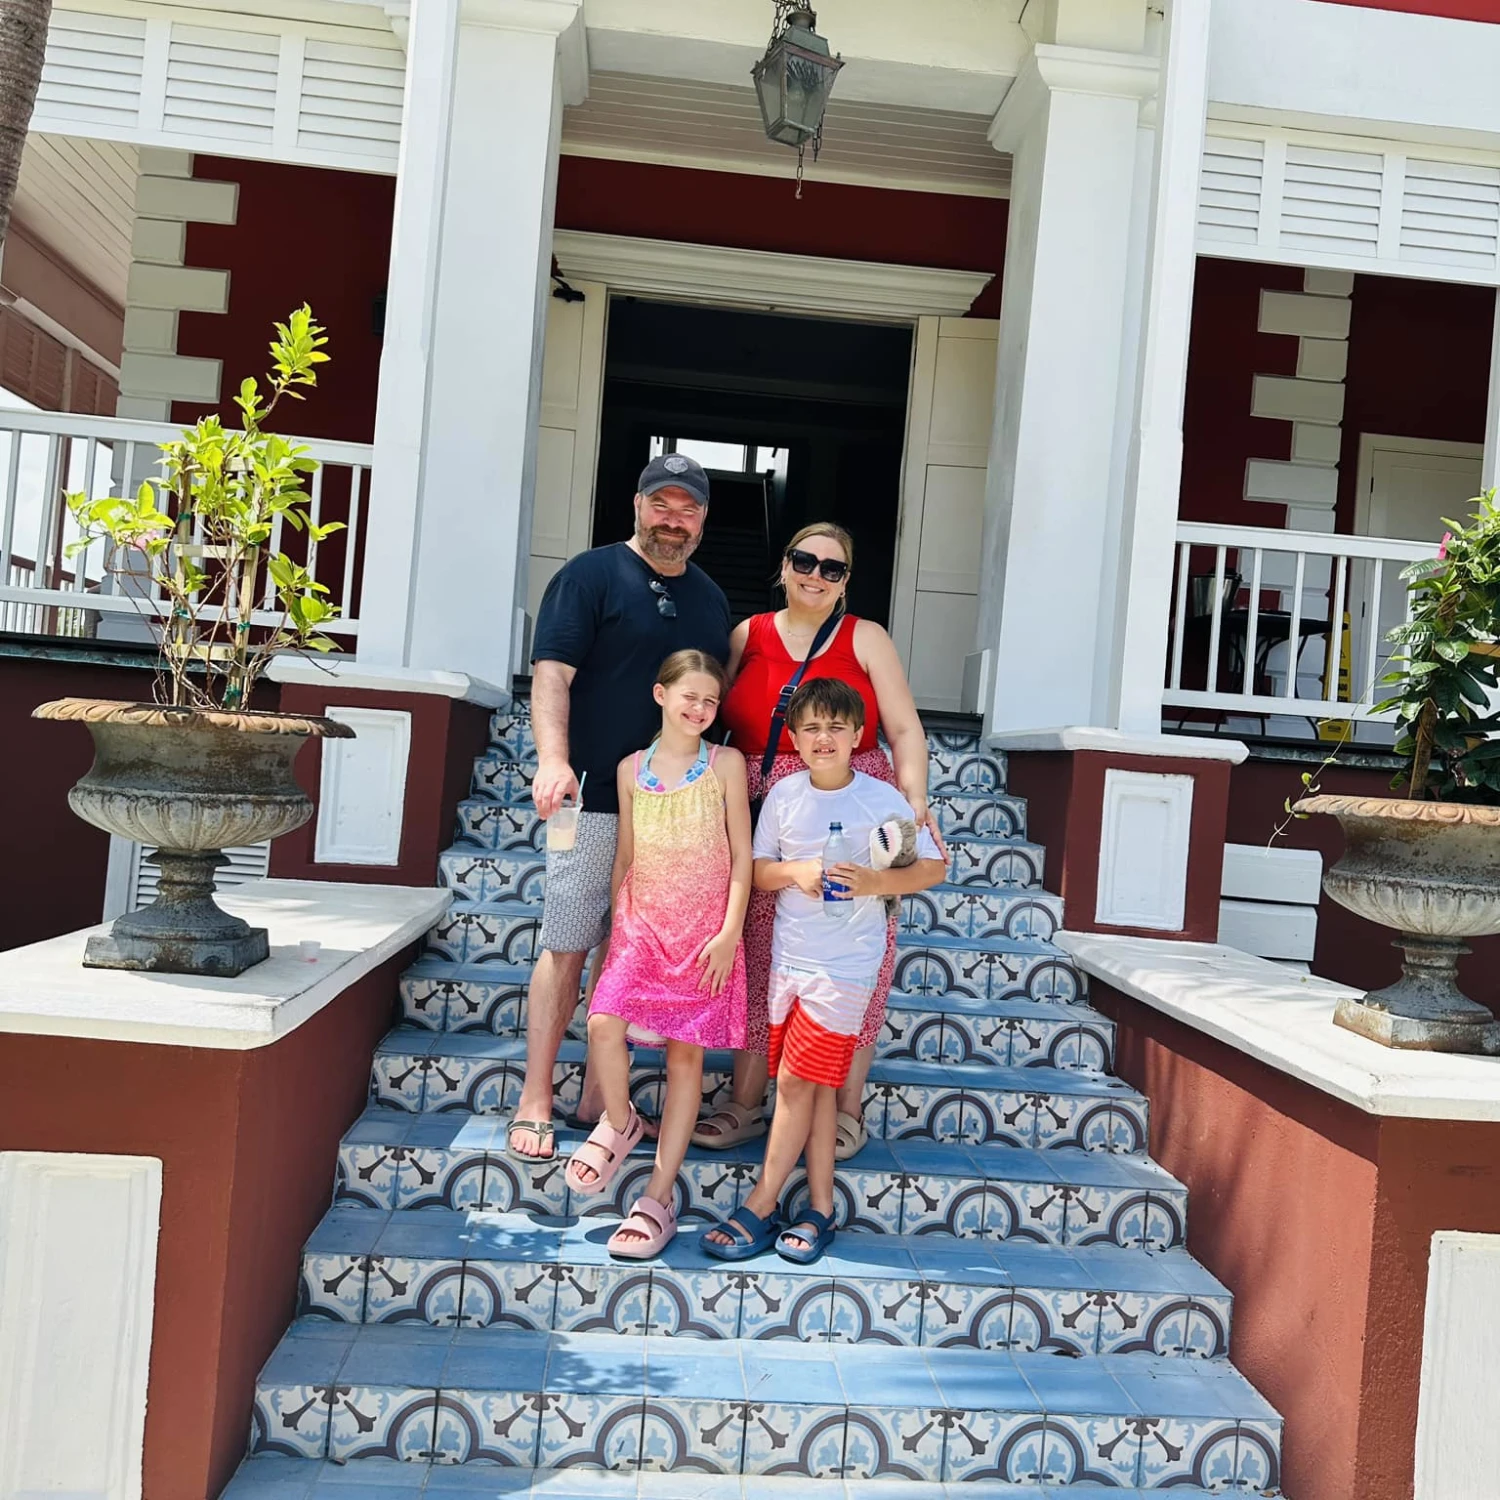 Travel advisor posing with family standing on entrance stairs